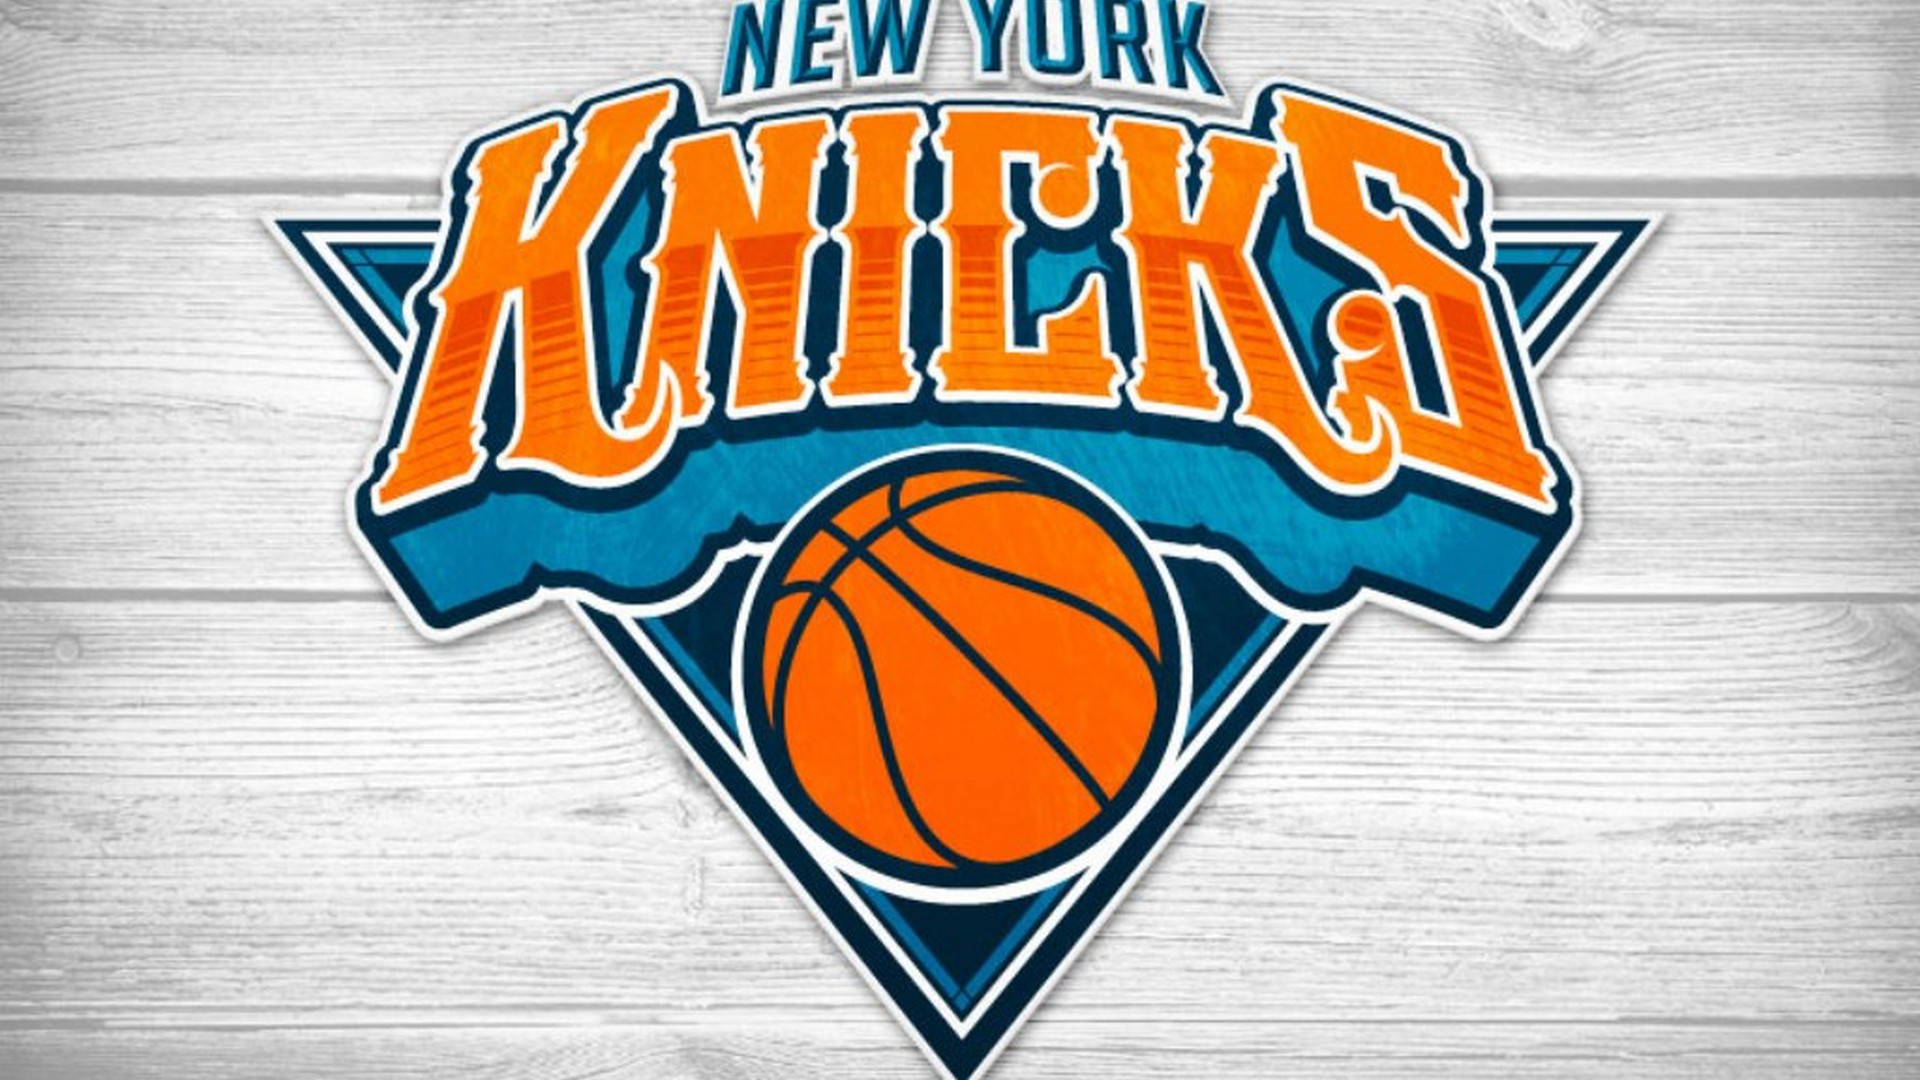 Knicks For Desktop Wallpaper with image dimensions 1920x1080 pixel. You can make this wallpaper for your Desktop Computer Backgrounds, Windows or Mac Screensavers, iPhone Lock screen, Tablet or Android and another Mobile Phone device